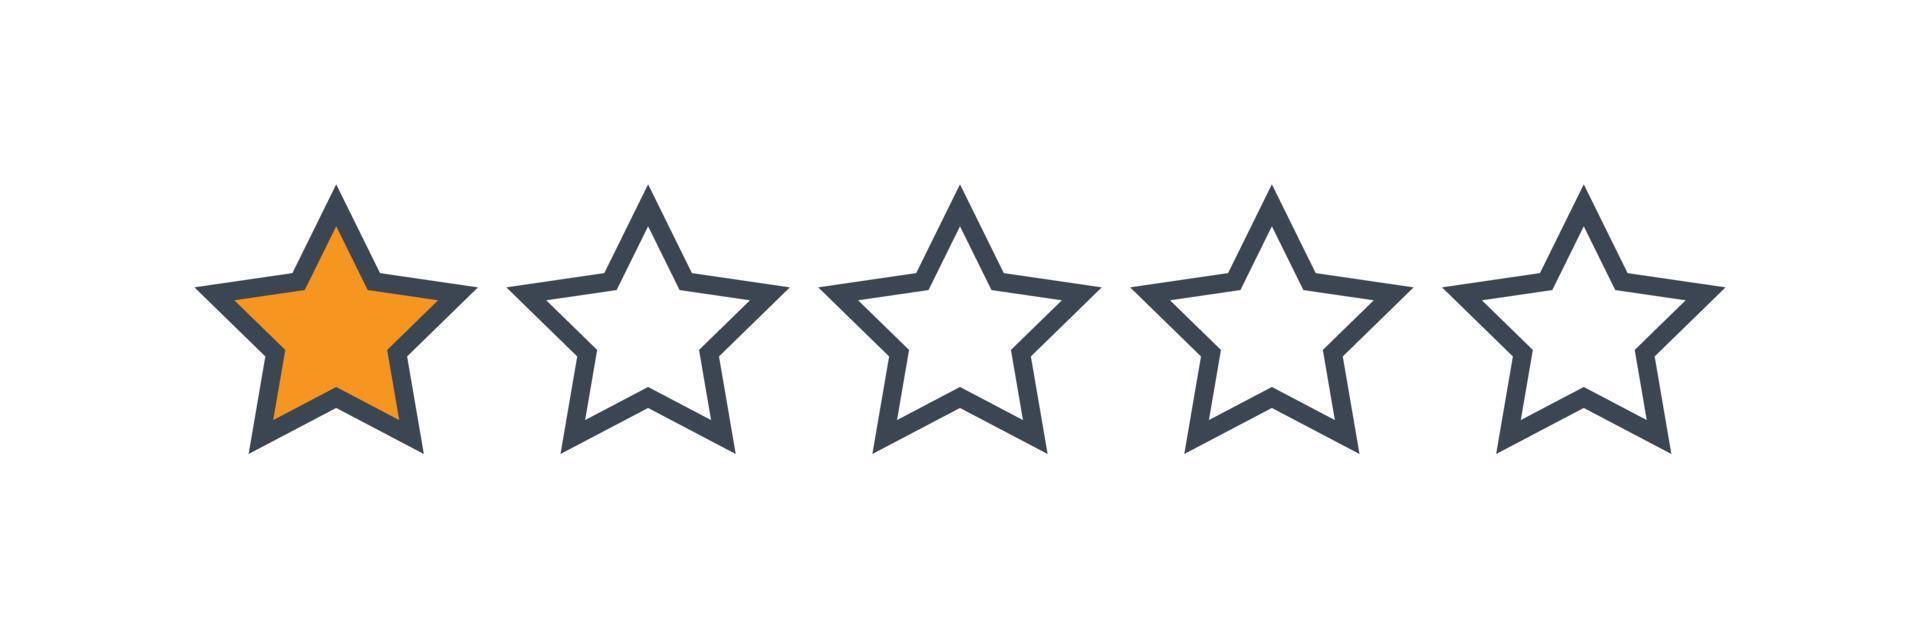 One stars customer product rating review vector